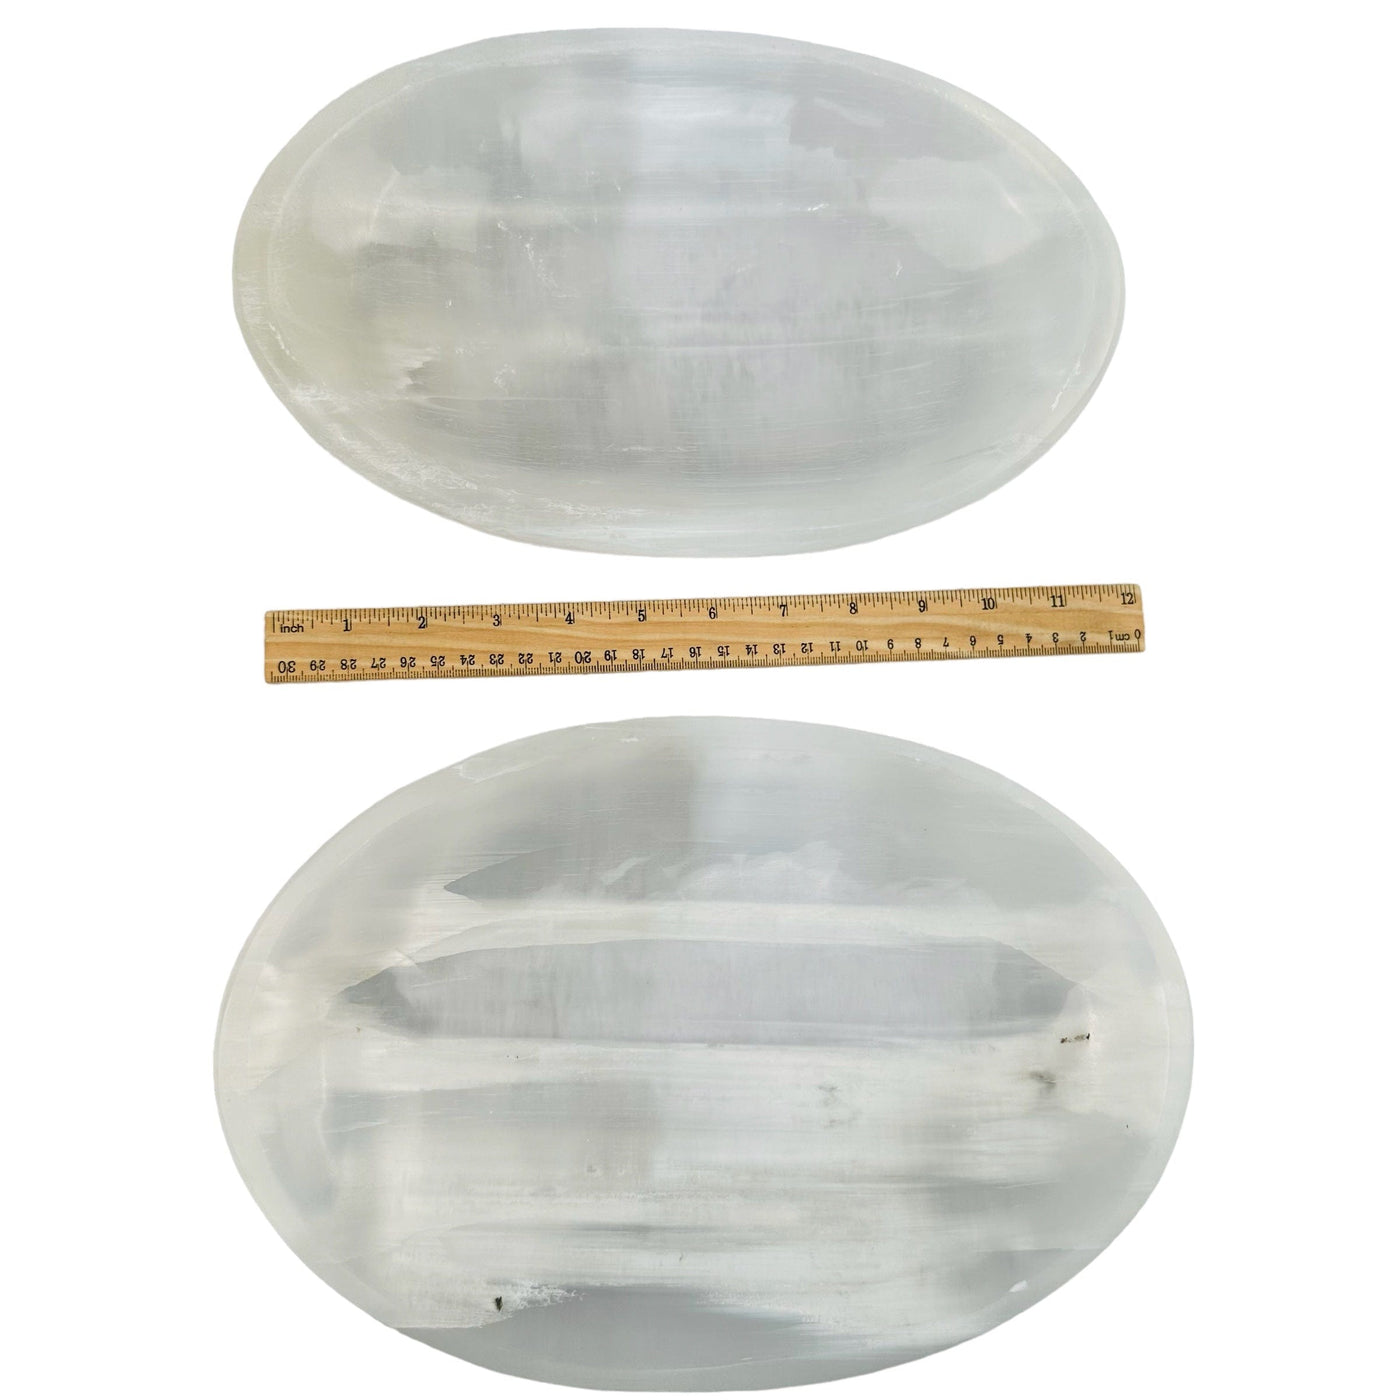 selenite bowls next to a ruler for size reference 